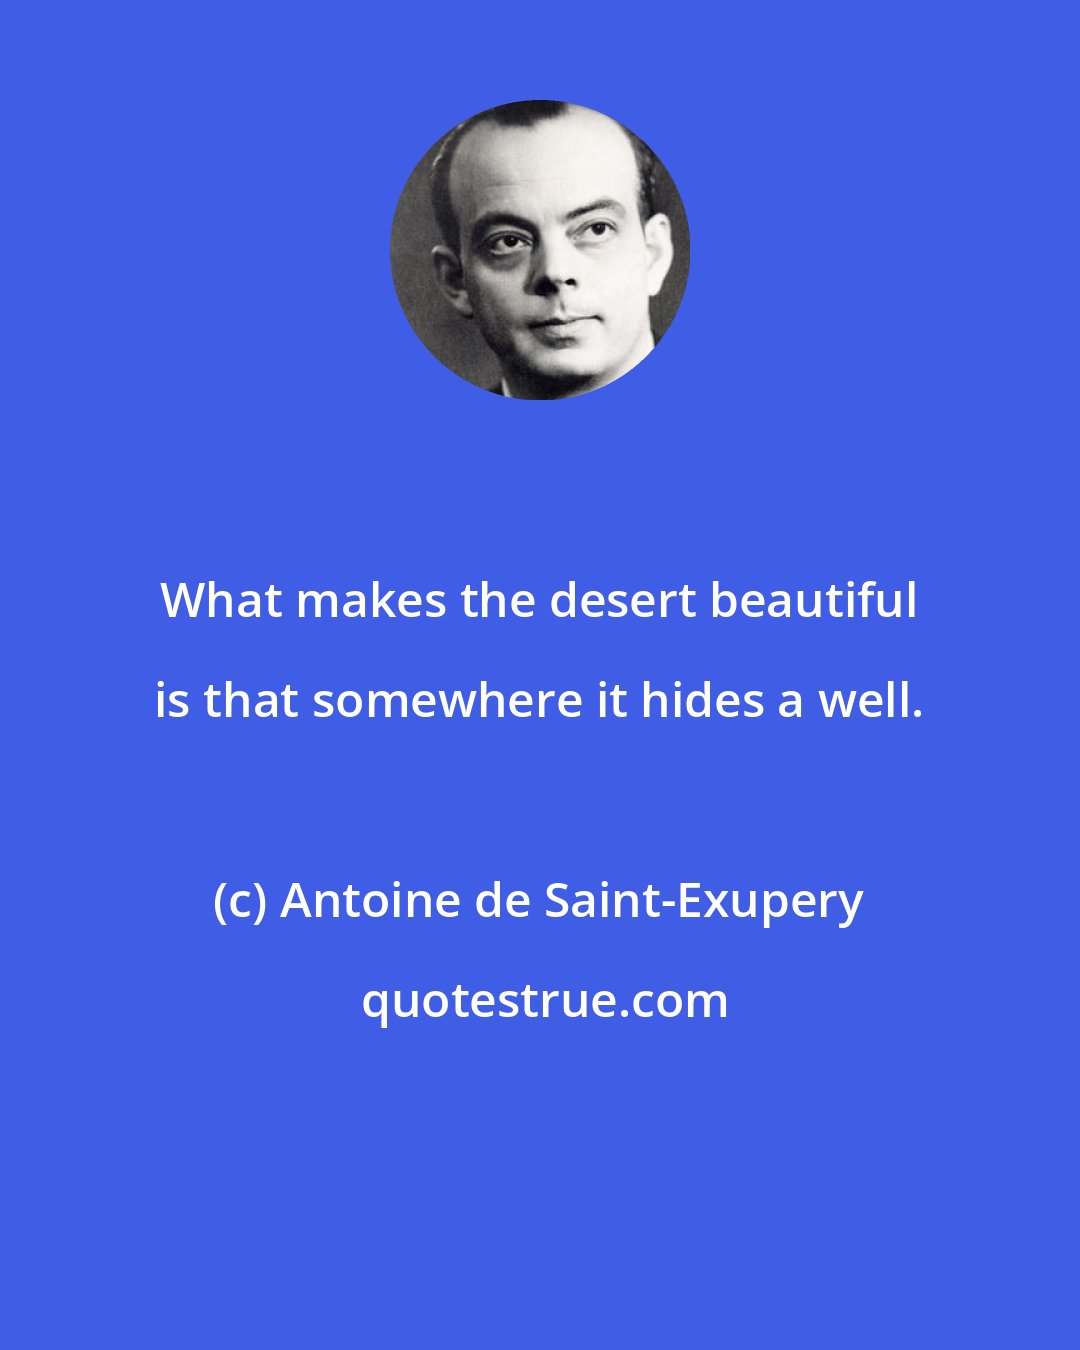 Antoine de Saint-Exupery: What makes the desert beautiful is that somewhere it hides a well.